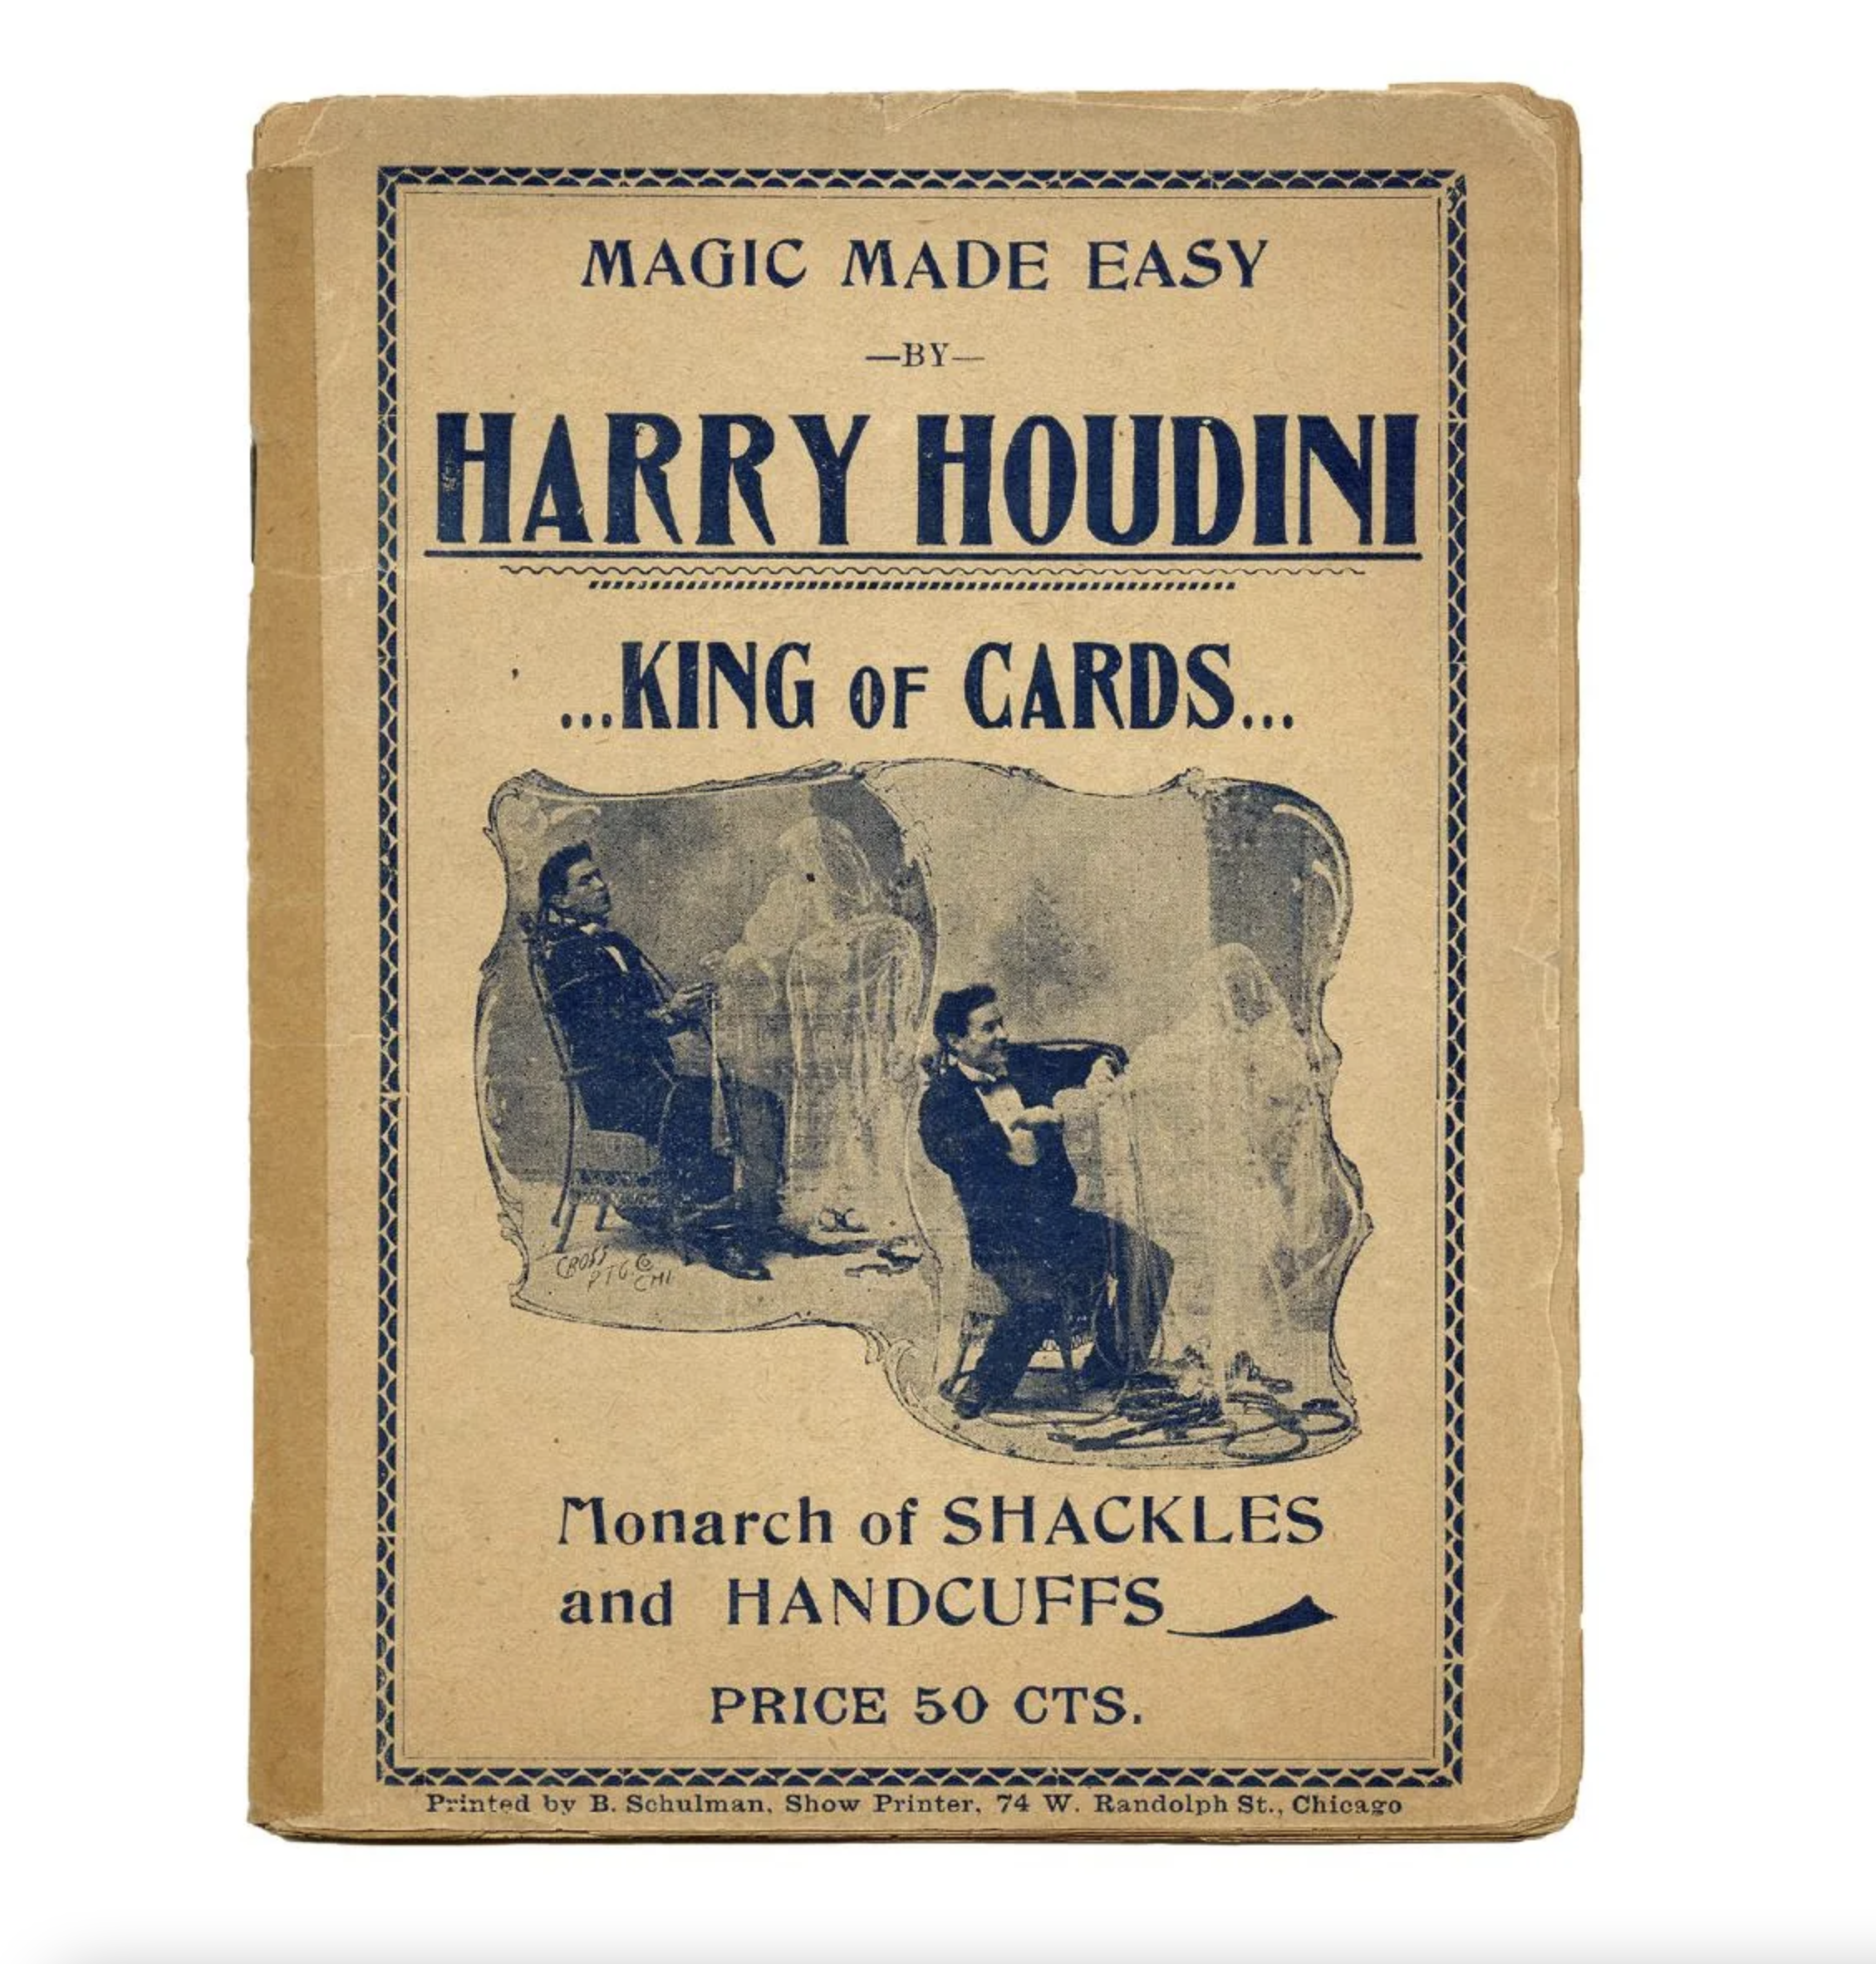 Magic Made Easy by Harry Houdini. King of Cards